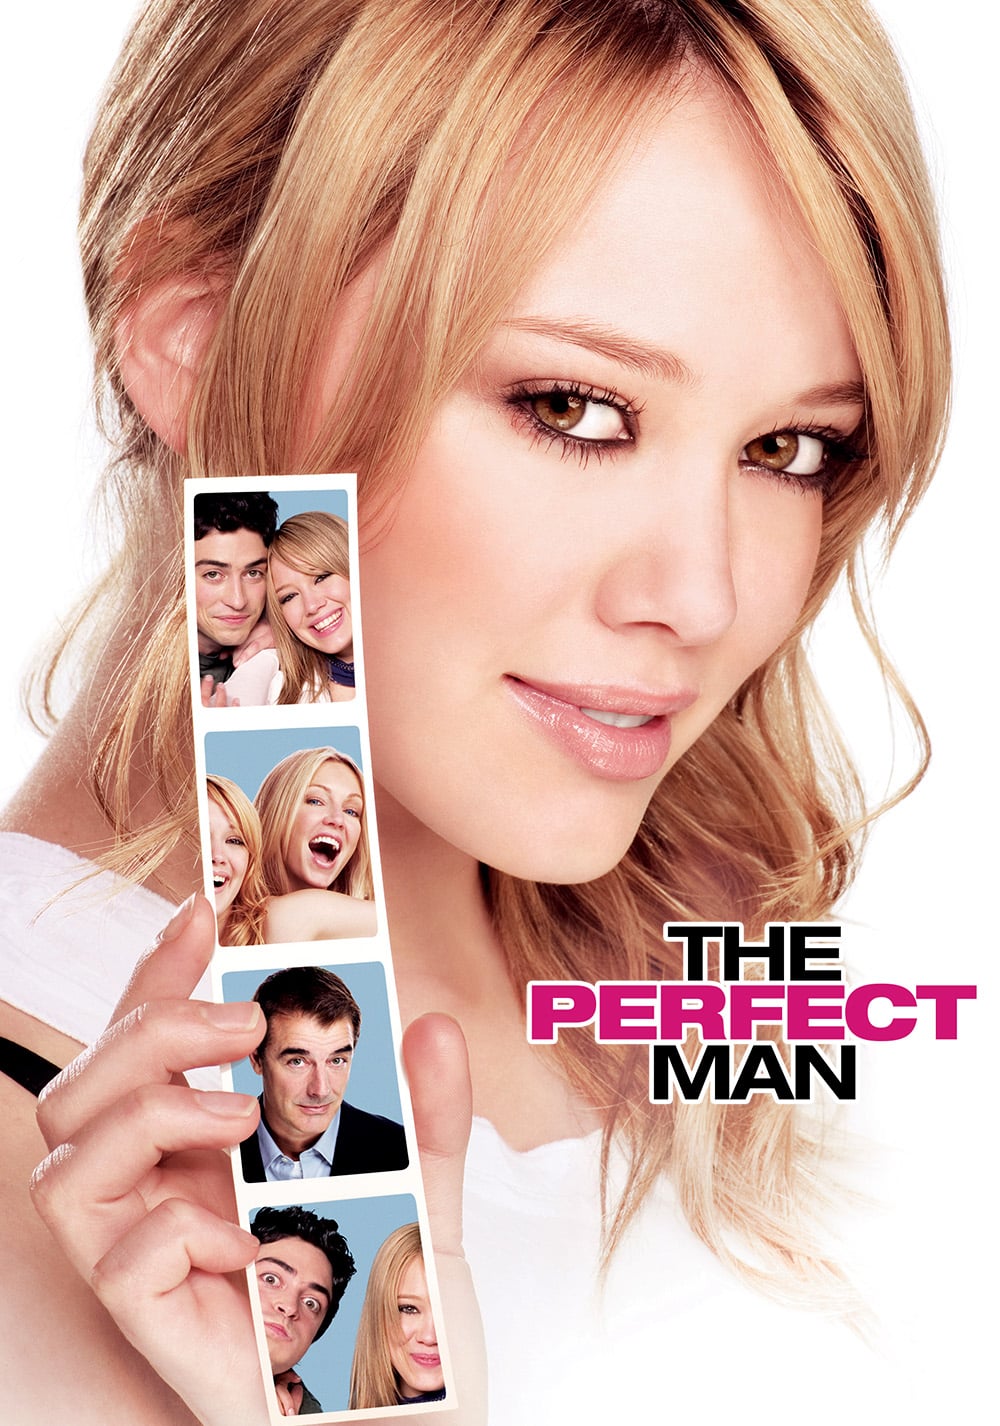 The Perfect Man Pg13 Guide Hilary Duff Heather Locklear Chris Noth Mike Omalley Ben Feldman